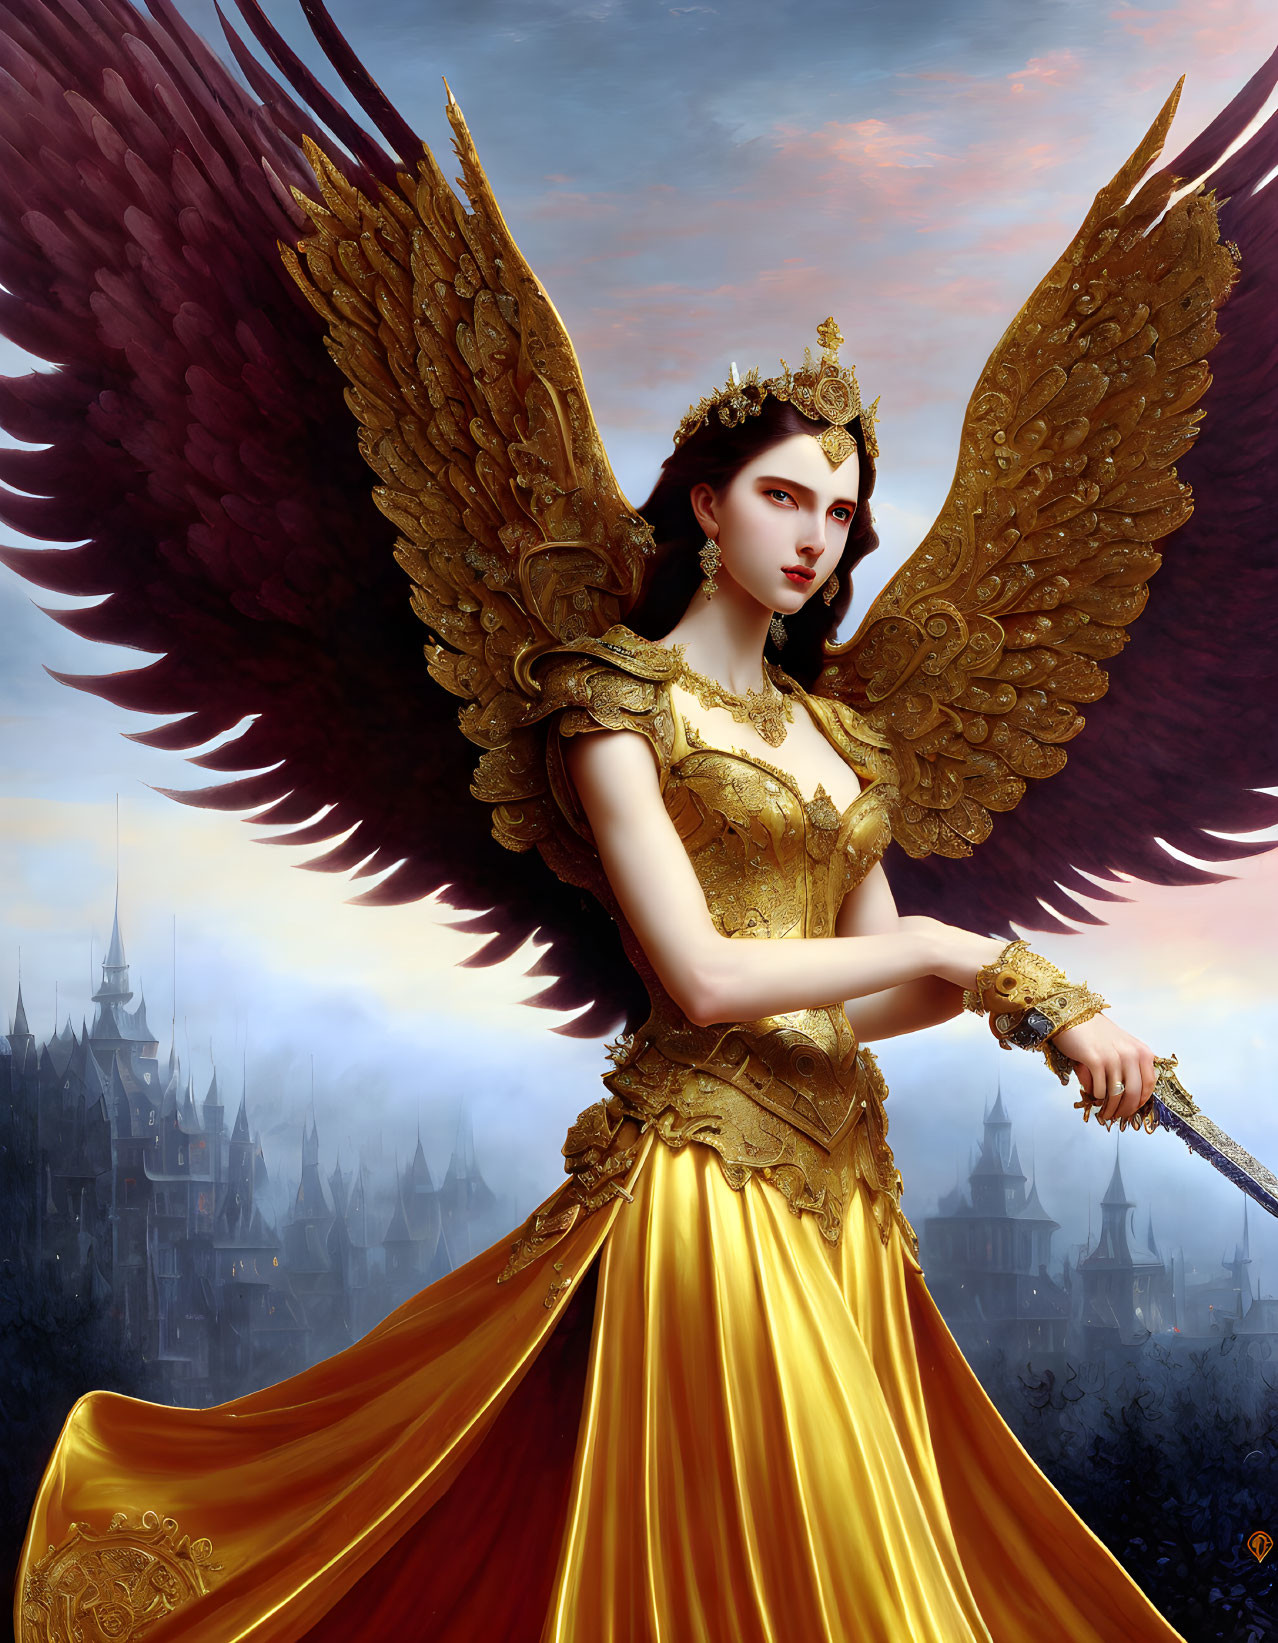 Regal figure with brown wings, crown, and scepter in misty castle backdrop